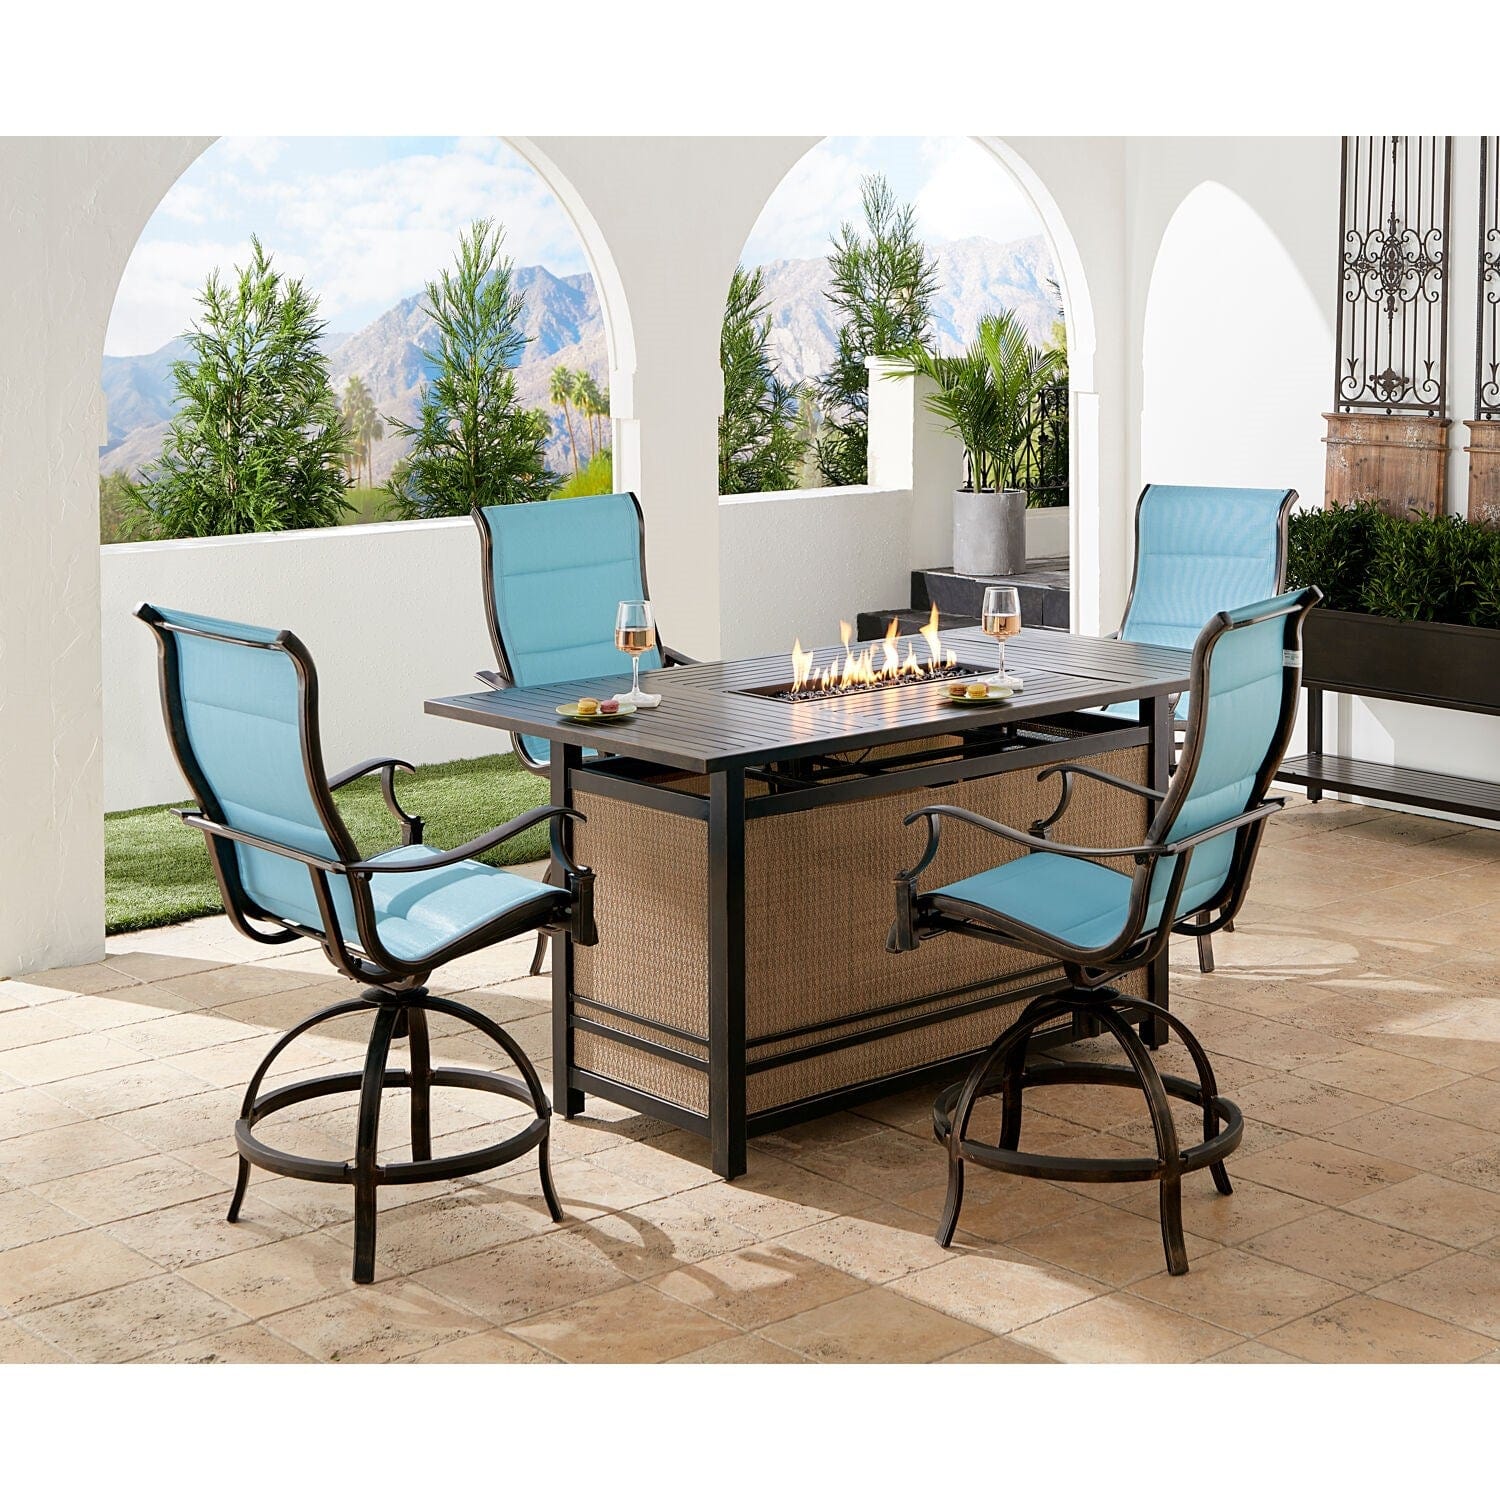 Hanover Fire Pit Dining Set Hanover Traditions 5-Piece Aluminium Frame High-Dining Set in Blue with 4 Padded Counter-Height Swivel Chairs and a 30,000 BTU Fire Pit Dining Table | TRAD5PCPFPDBR-BLU